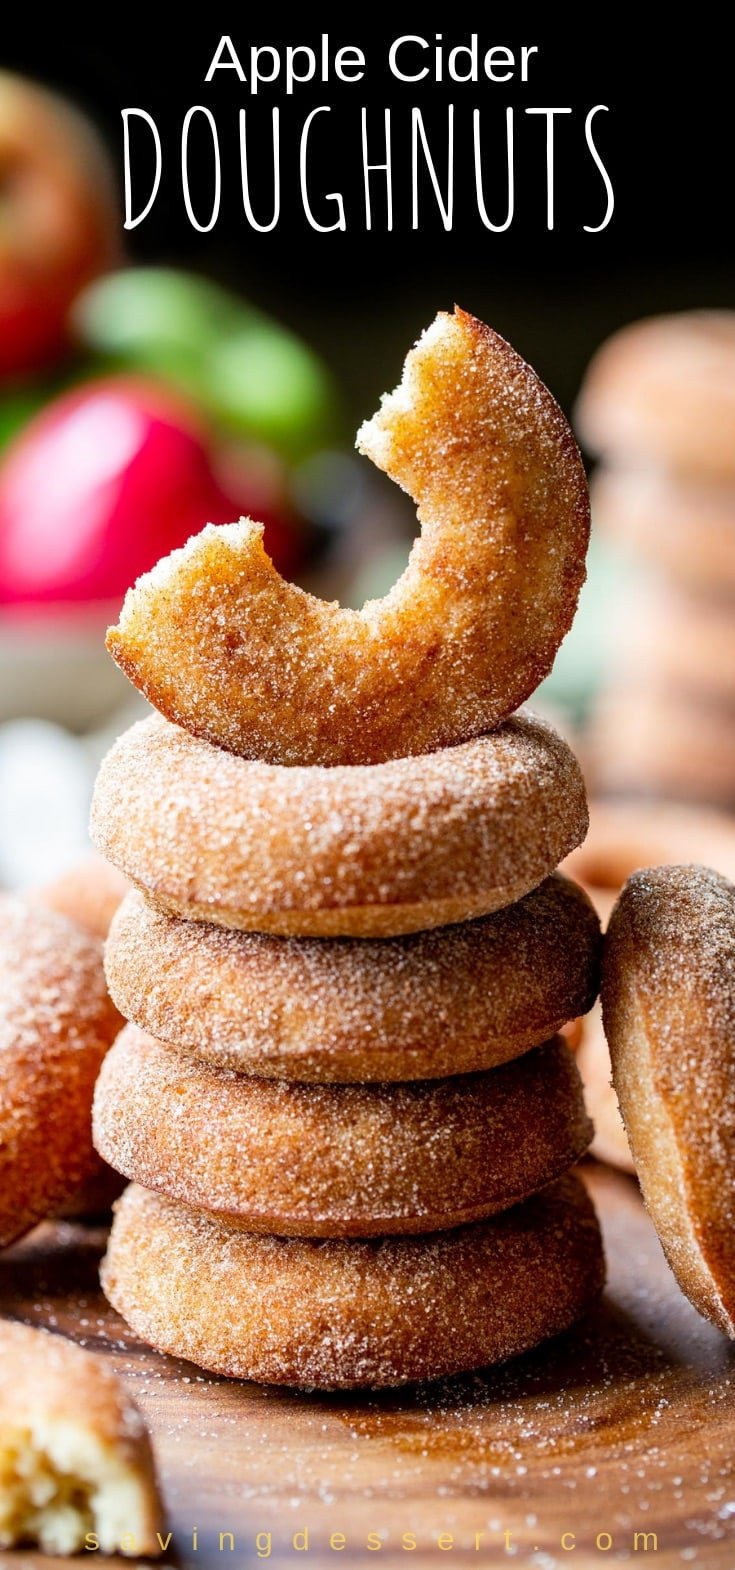 A stack of apple cider doughnuts coated in cinnamon sugar